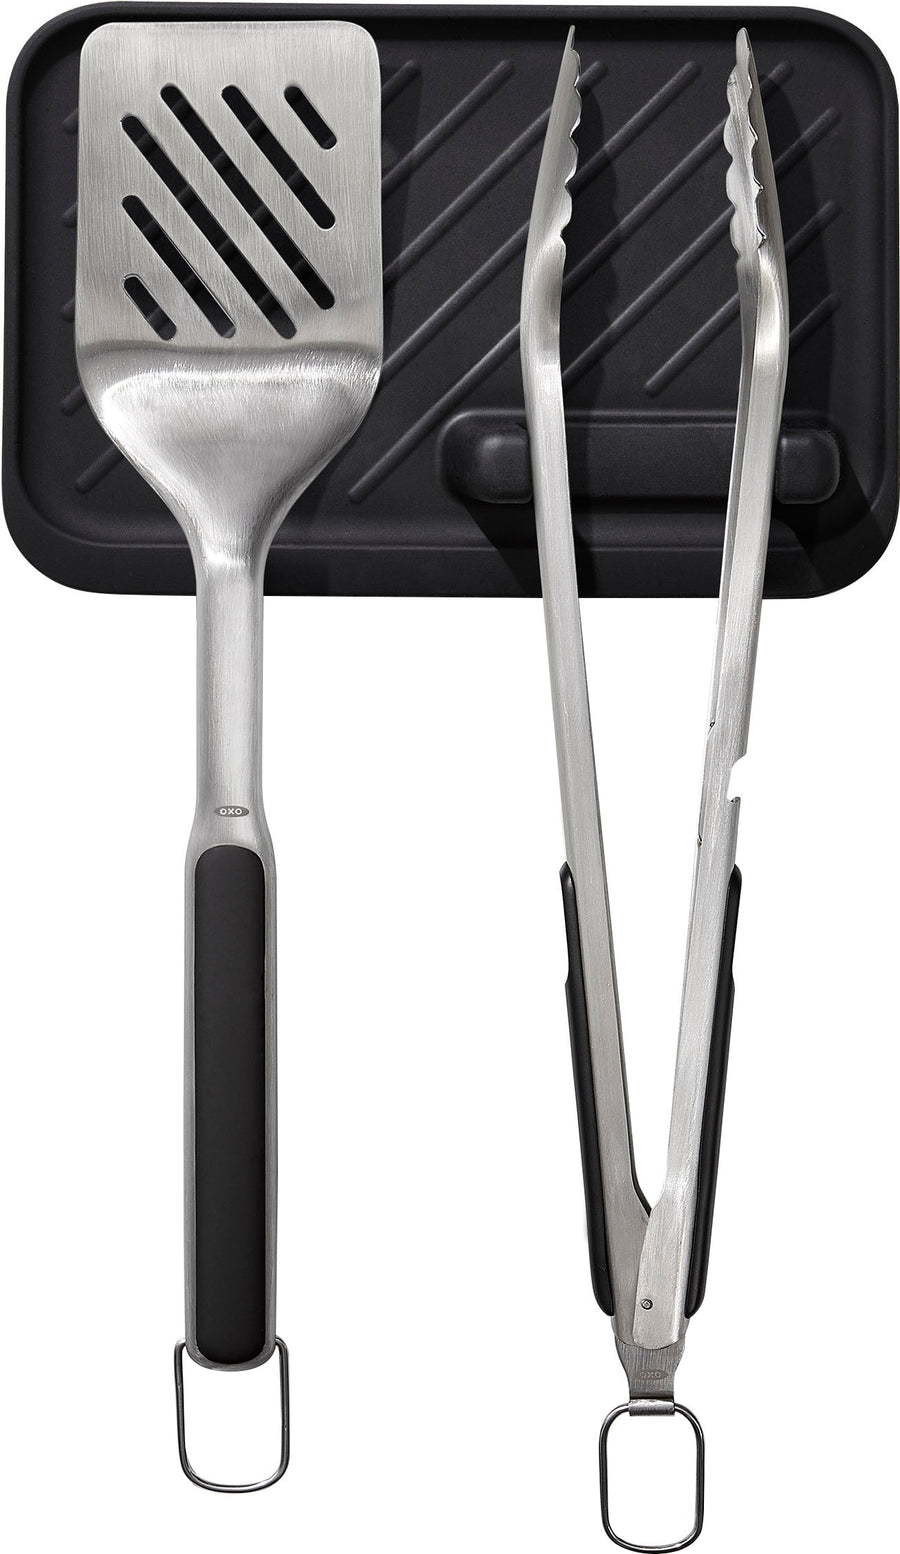 OXO - GG 3 Piece Grilling Set - Silver_0